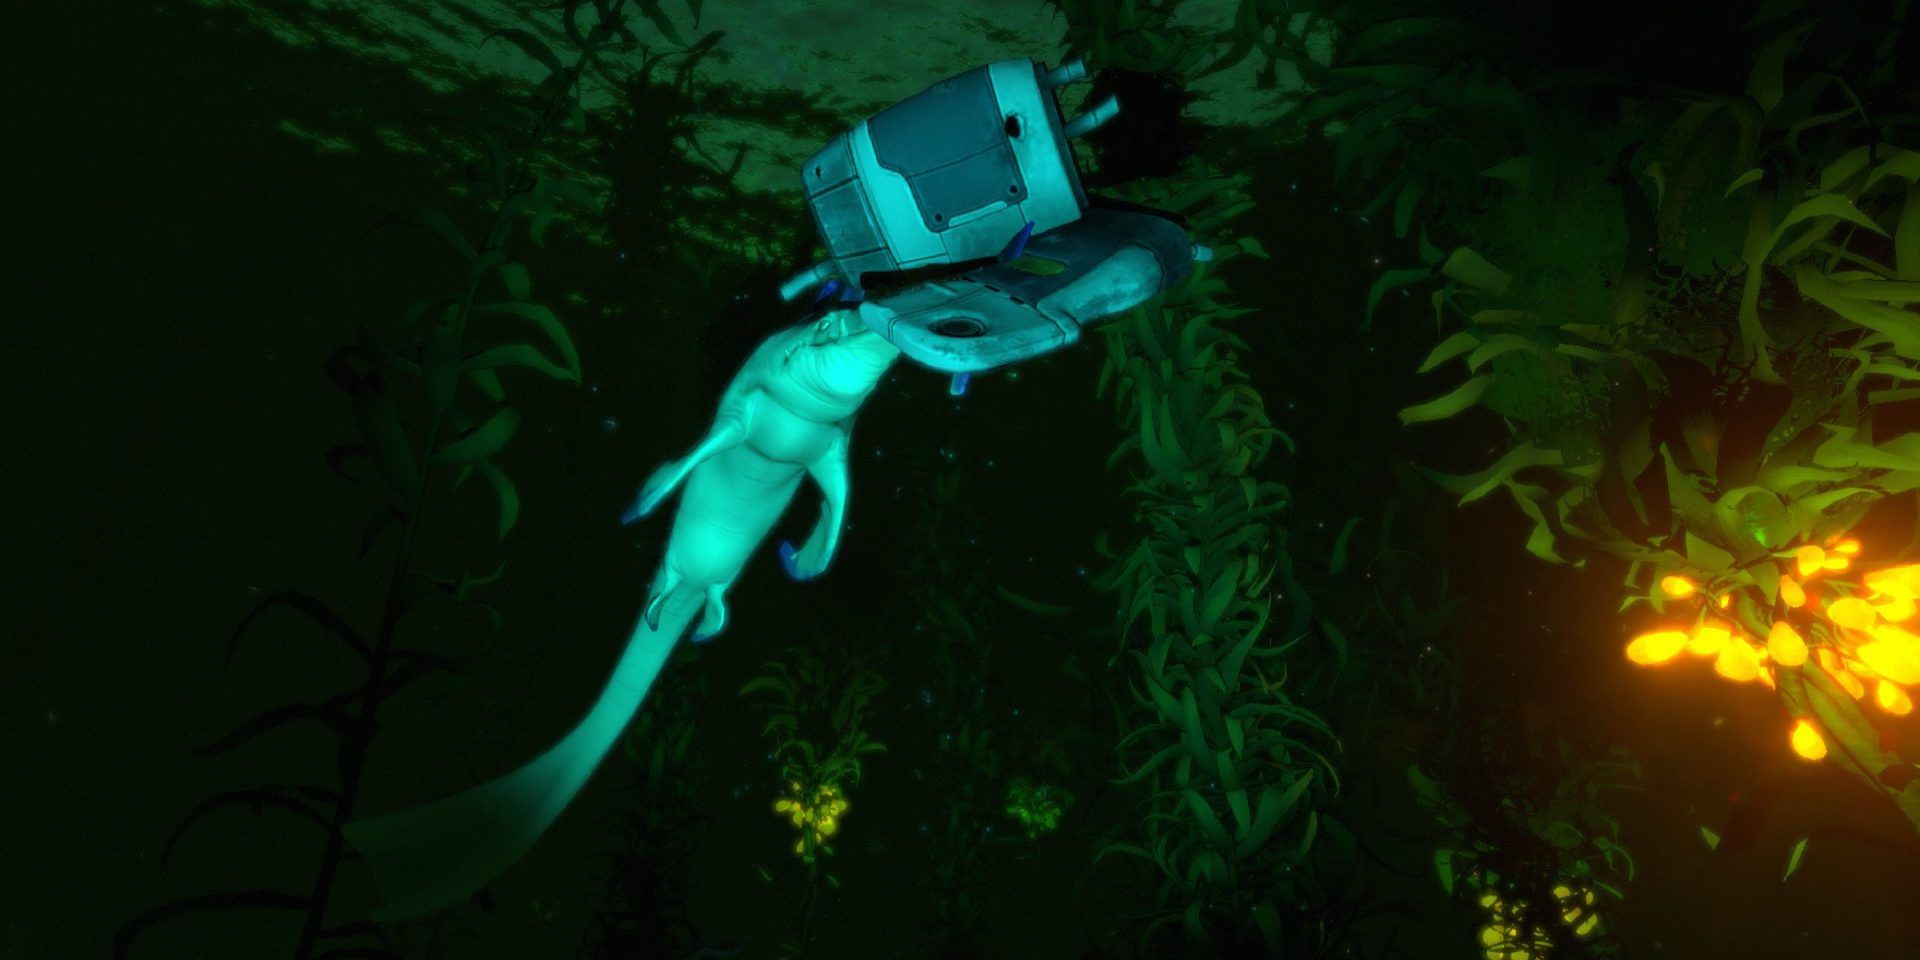 A Stalker playing around with a bit of scrap metal in the kelp forests in Subnautica.